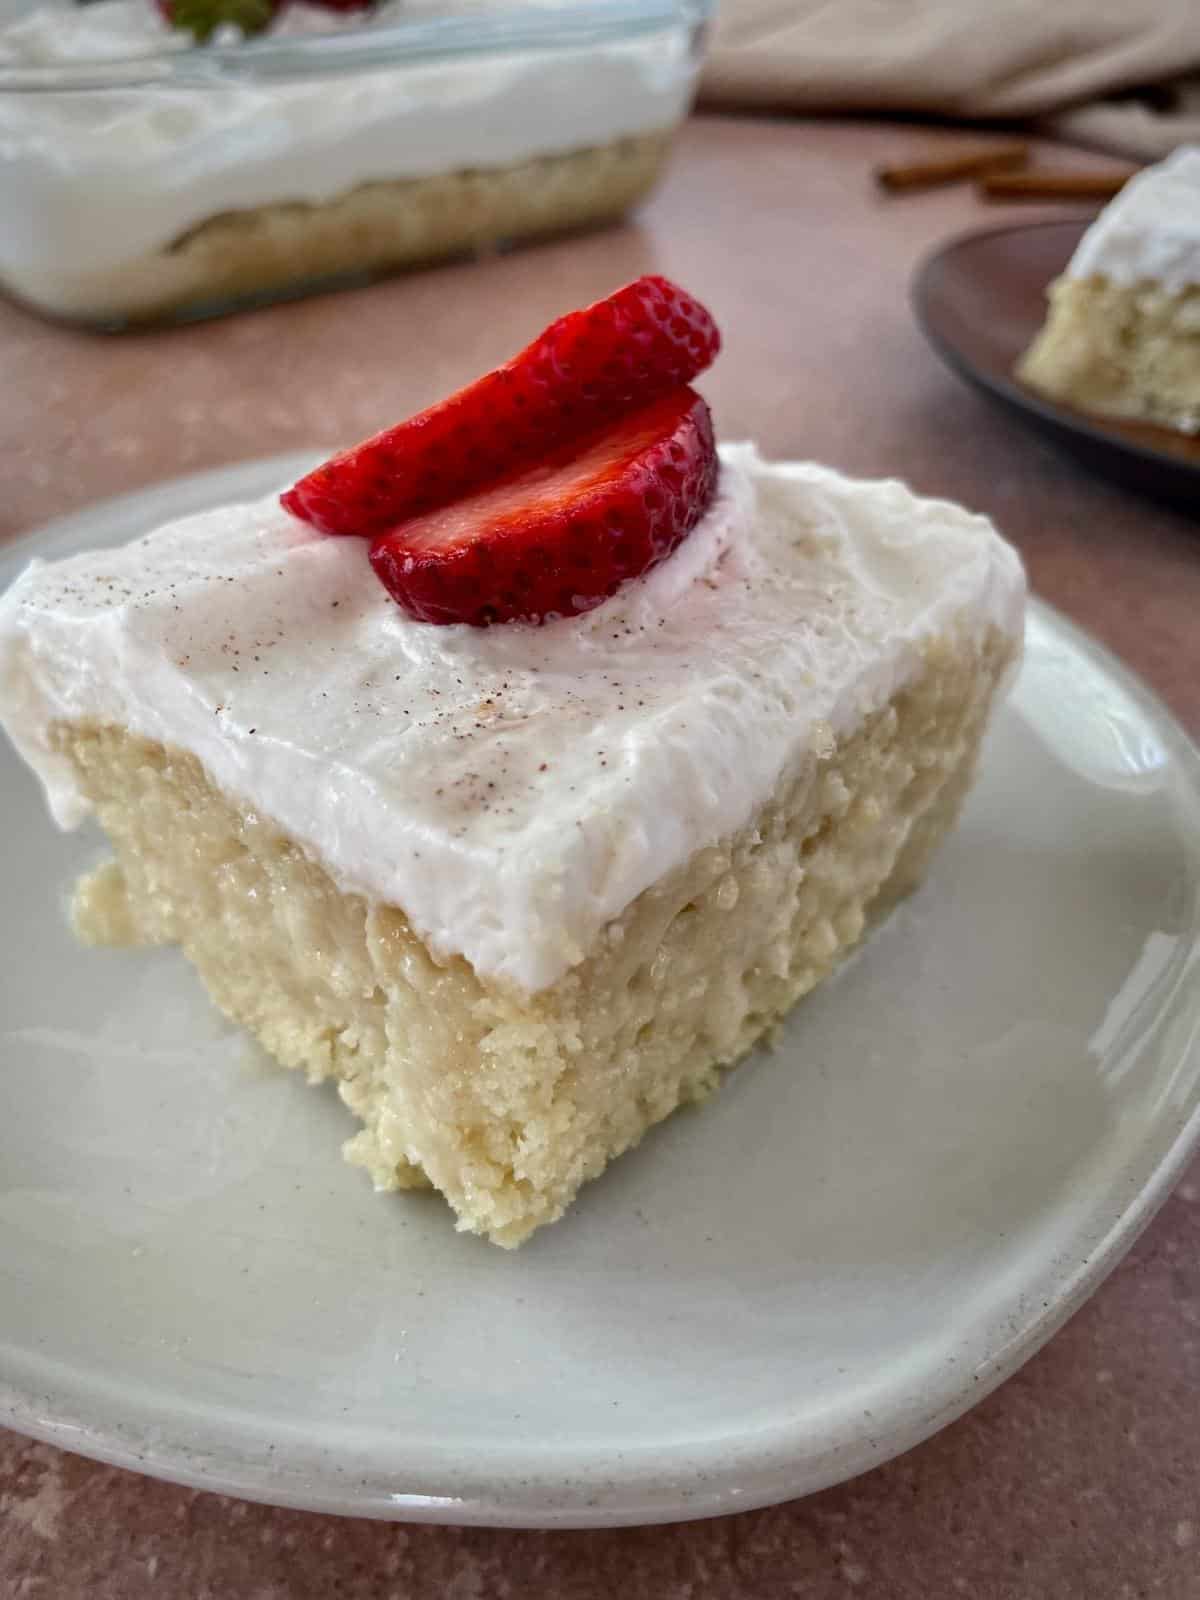 Tres leches slice of cake with strawberries.